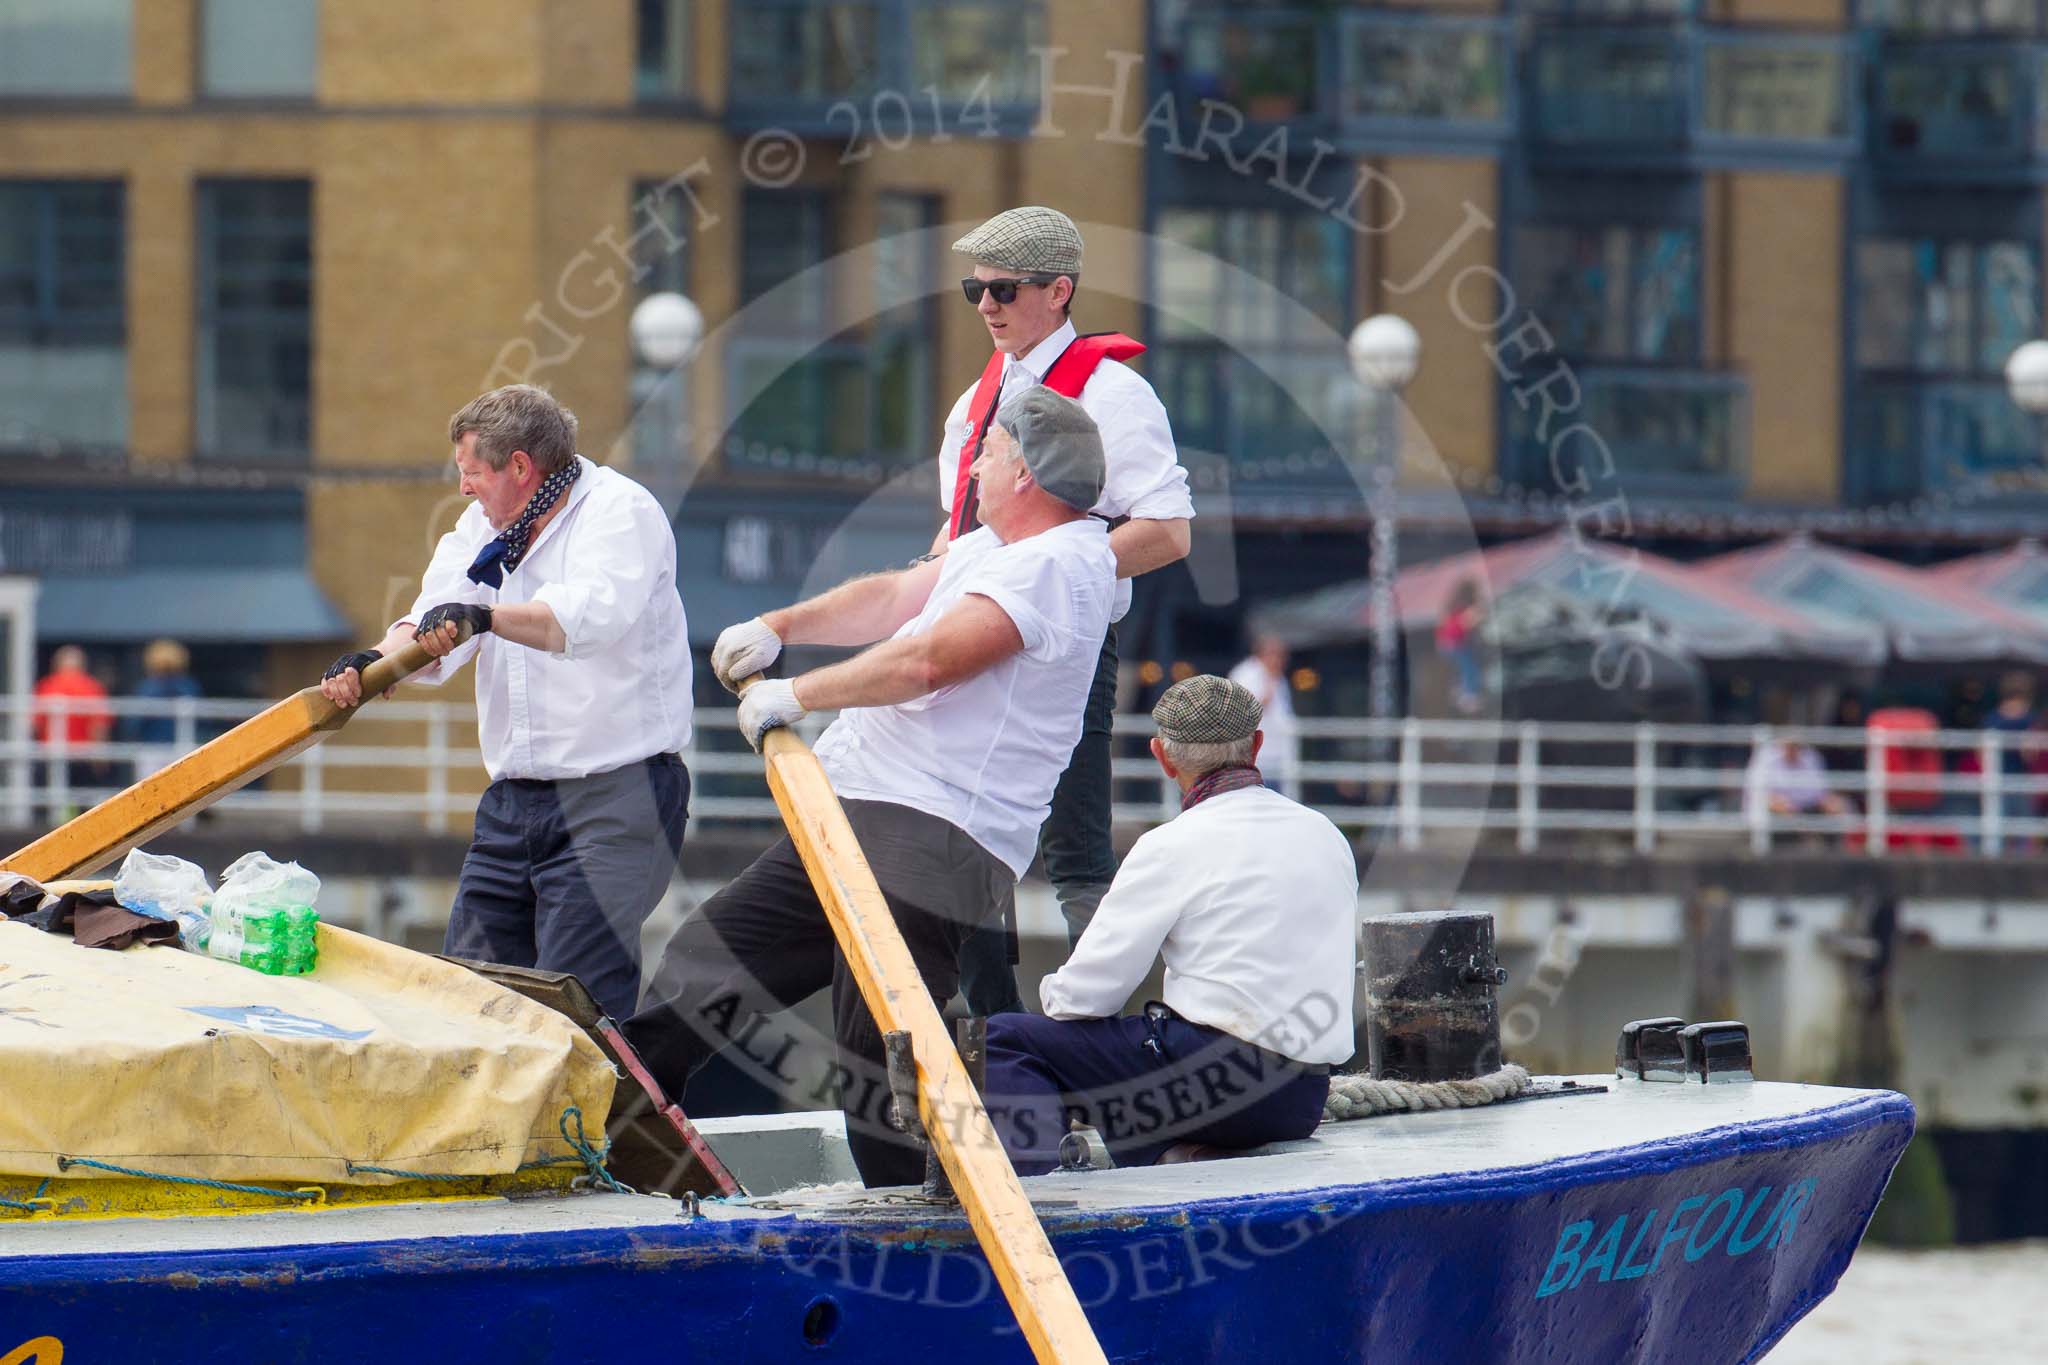 TOW River Thames Barge Driving Race 2014.
River Thames between Greenwich and Westminster,
London,

United Kingdom,
on 28 June 2014 at 13:35, image #258